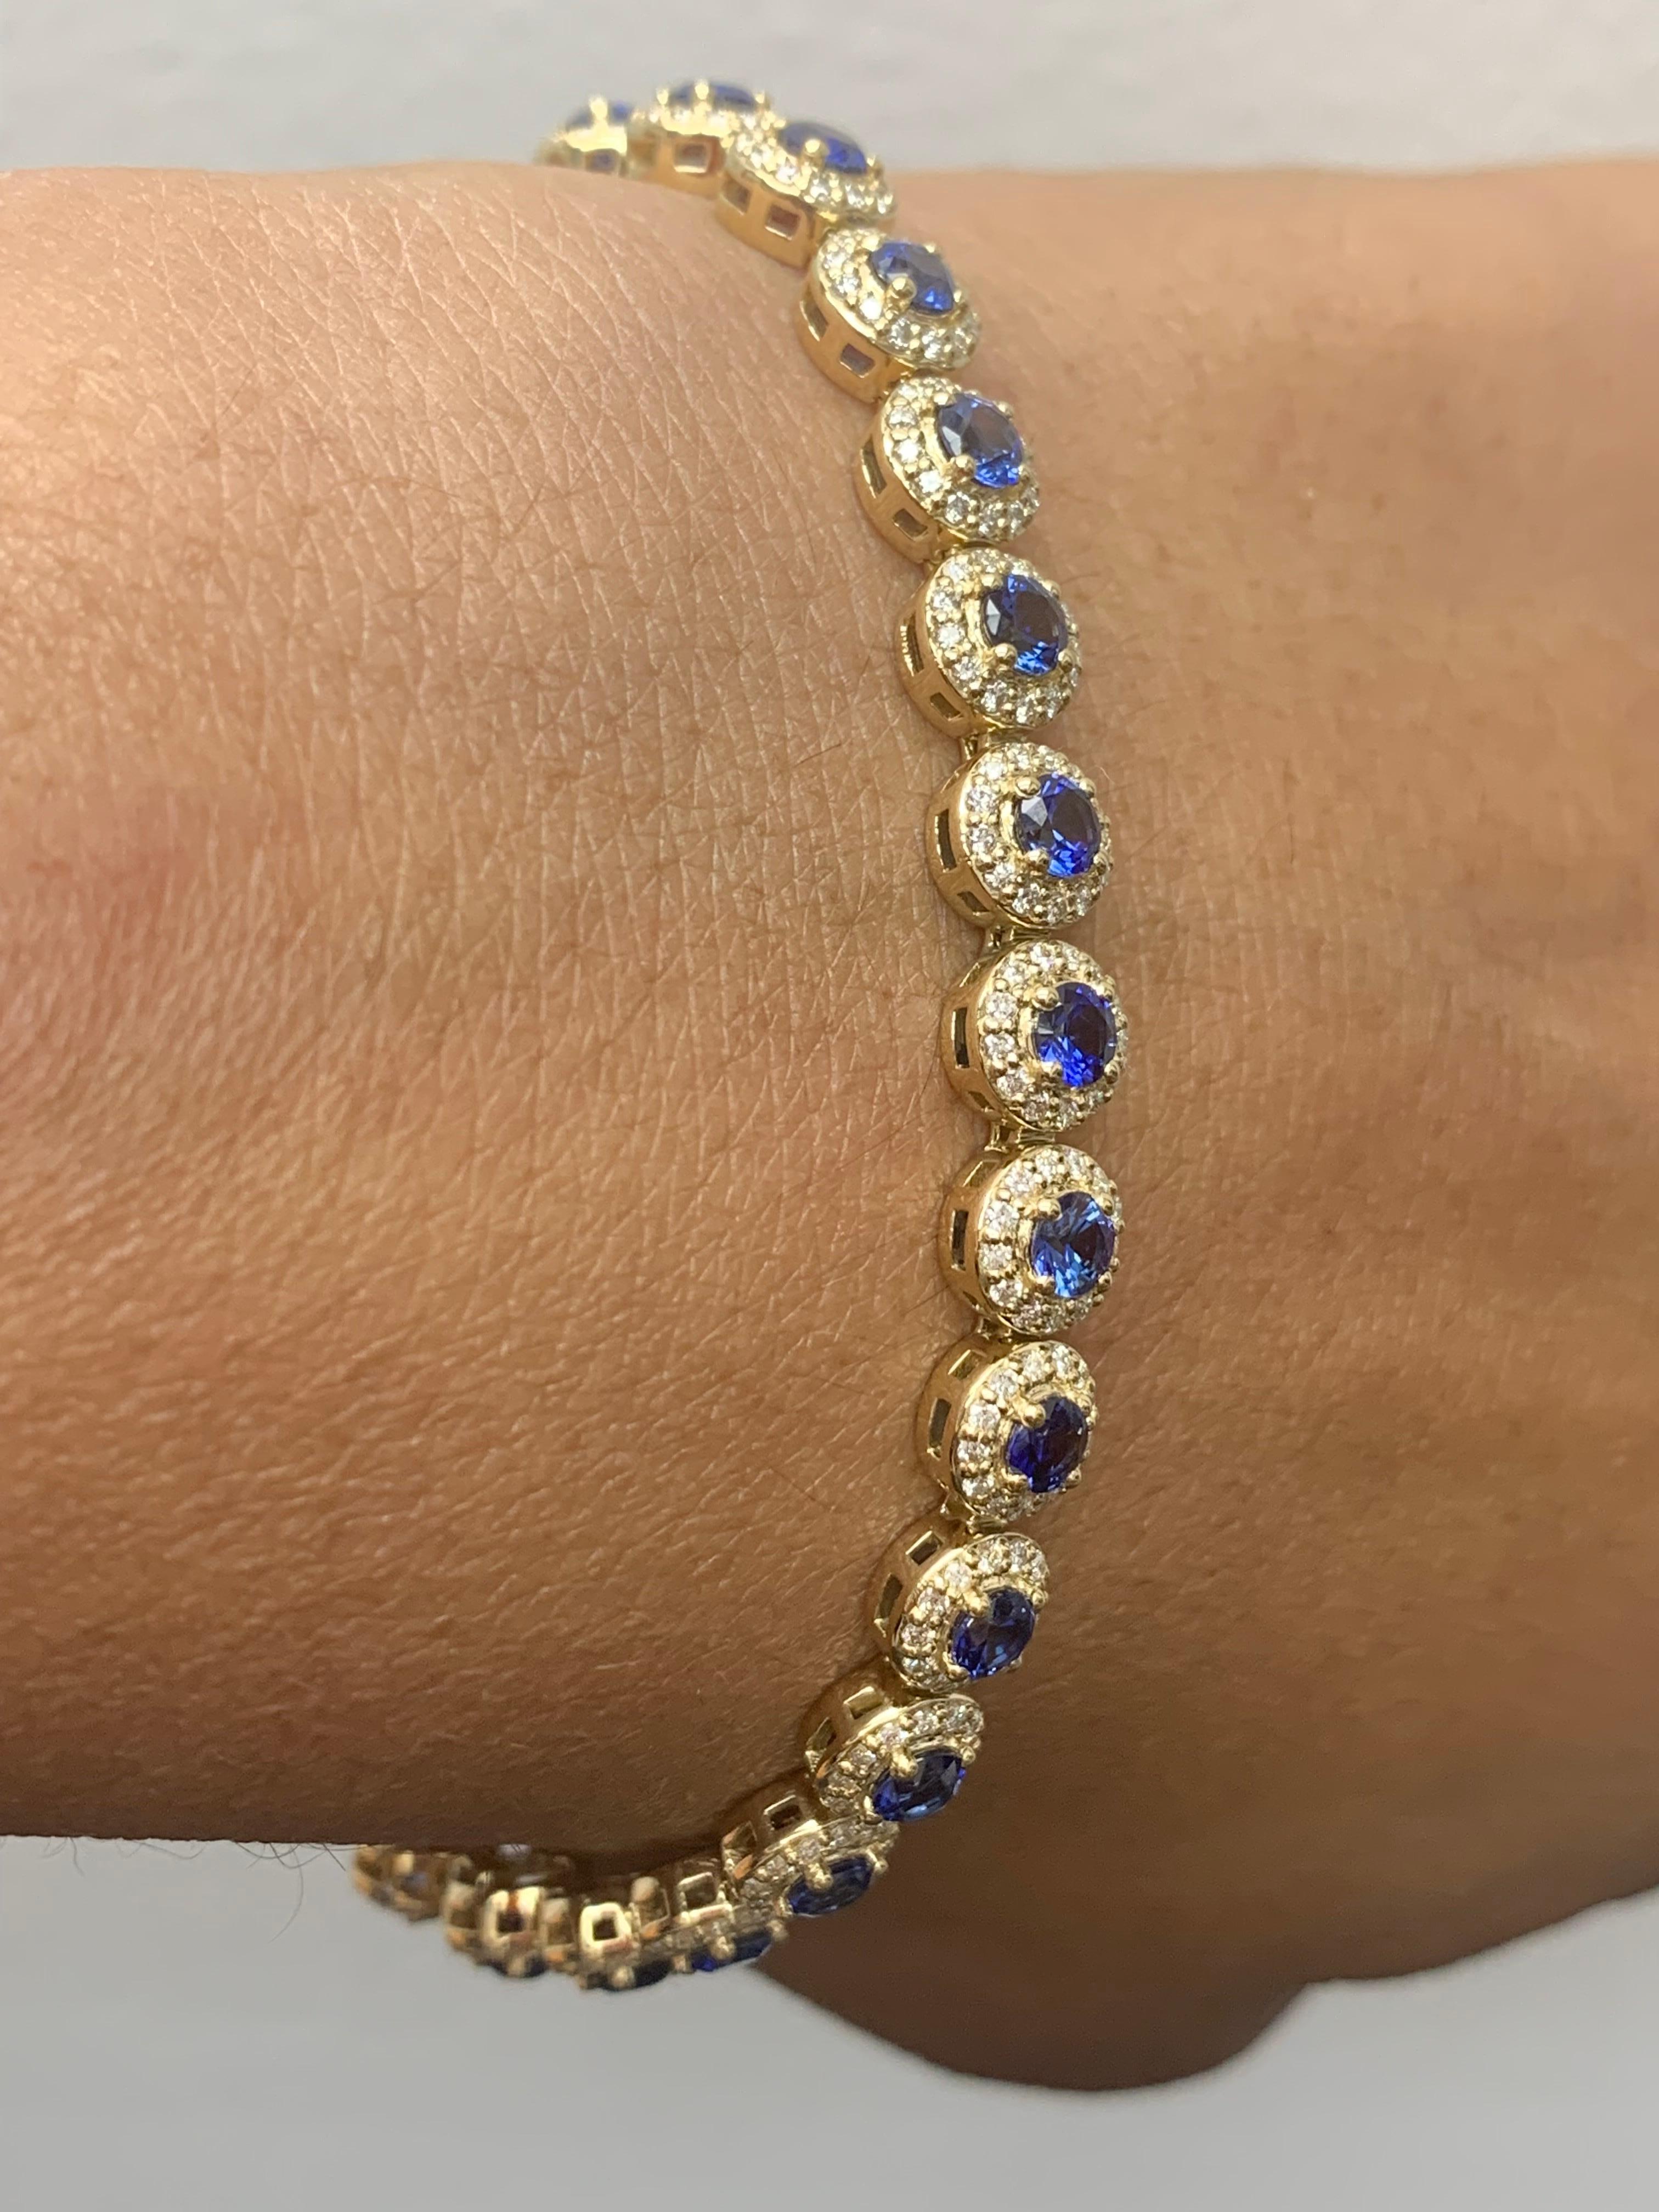 Women's 4.67 Carat Round Cut Sapphire and Diamond Tennis Bracelet in 14K Yellow Gold For Sale